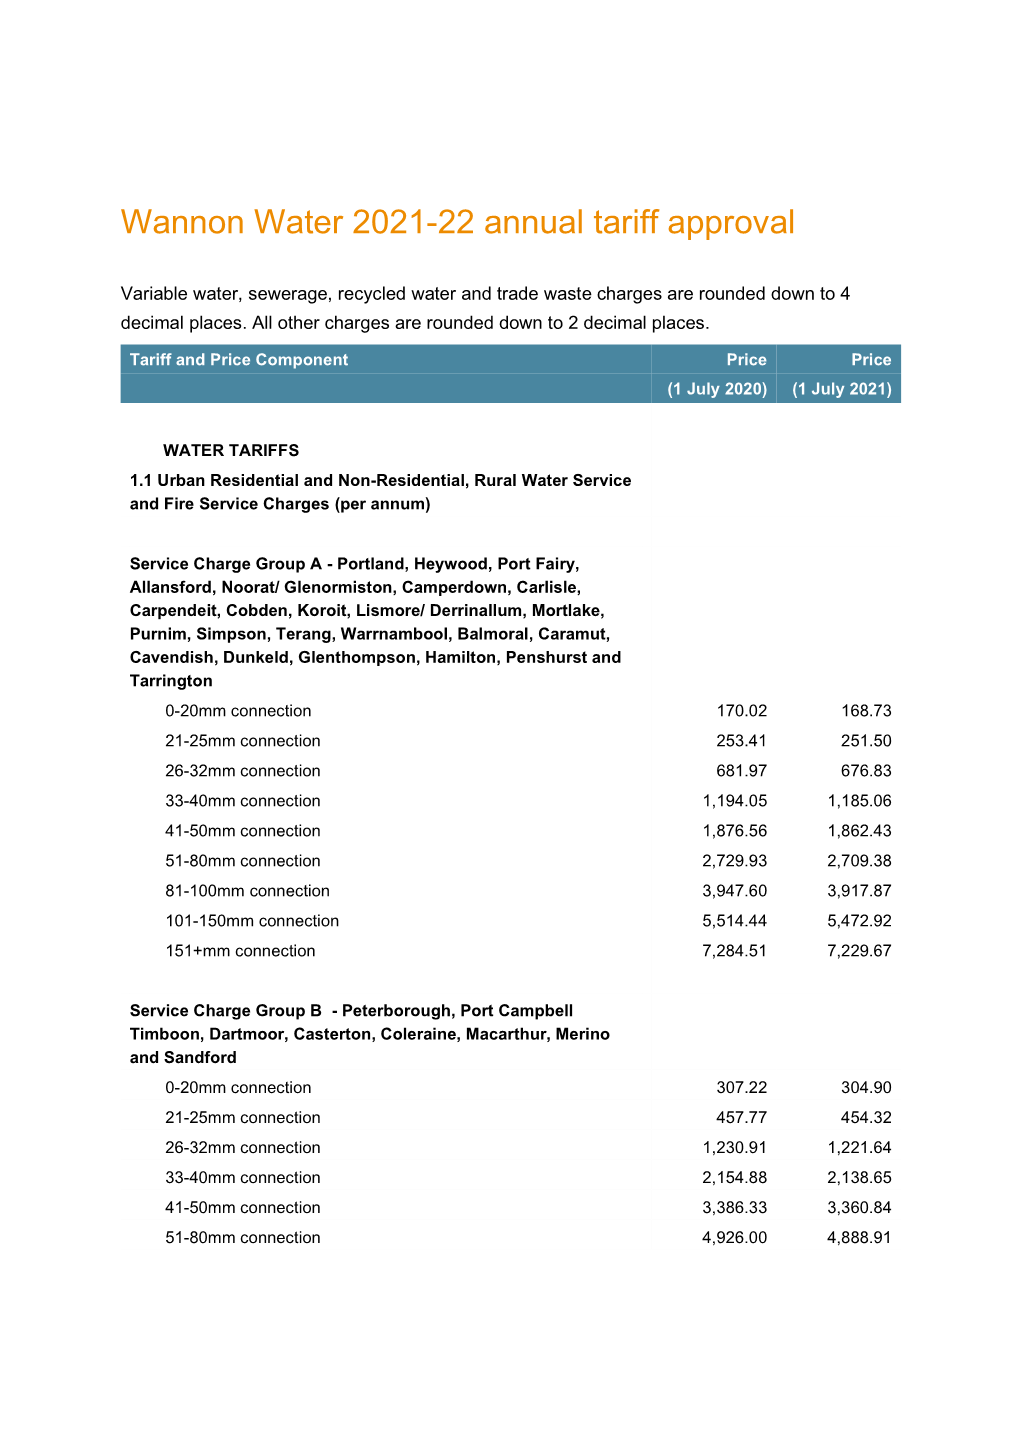 Wannon Water 2021-22 Annual Tariff Approval